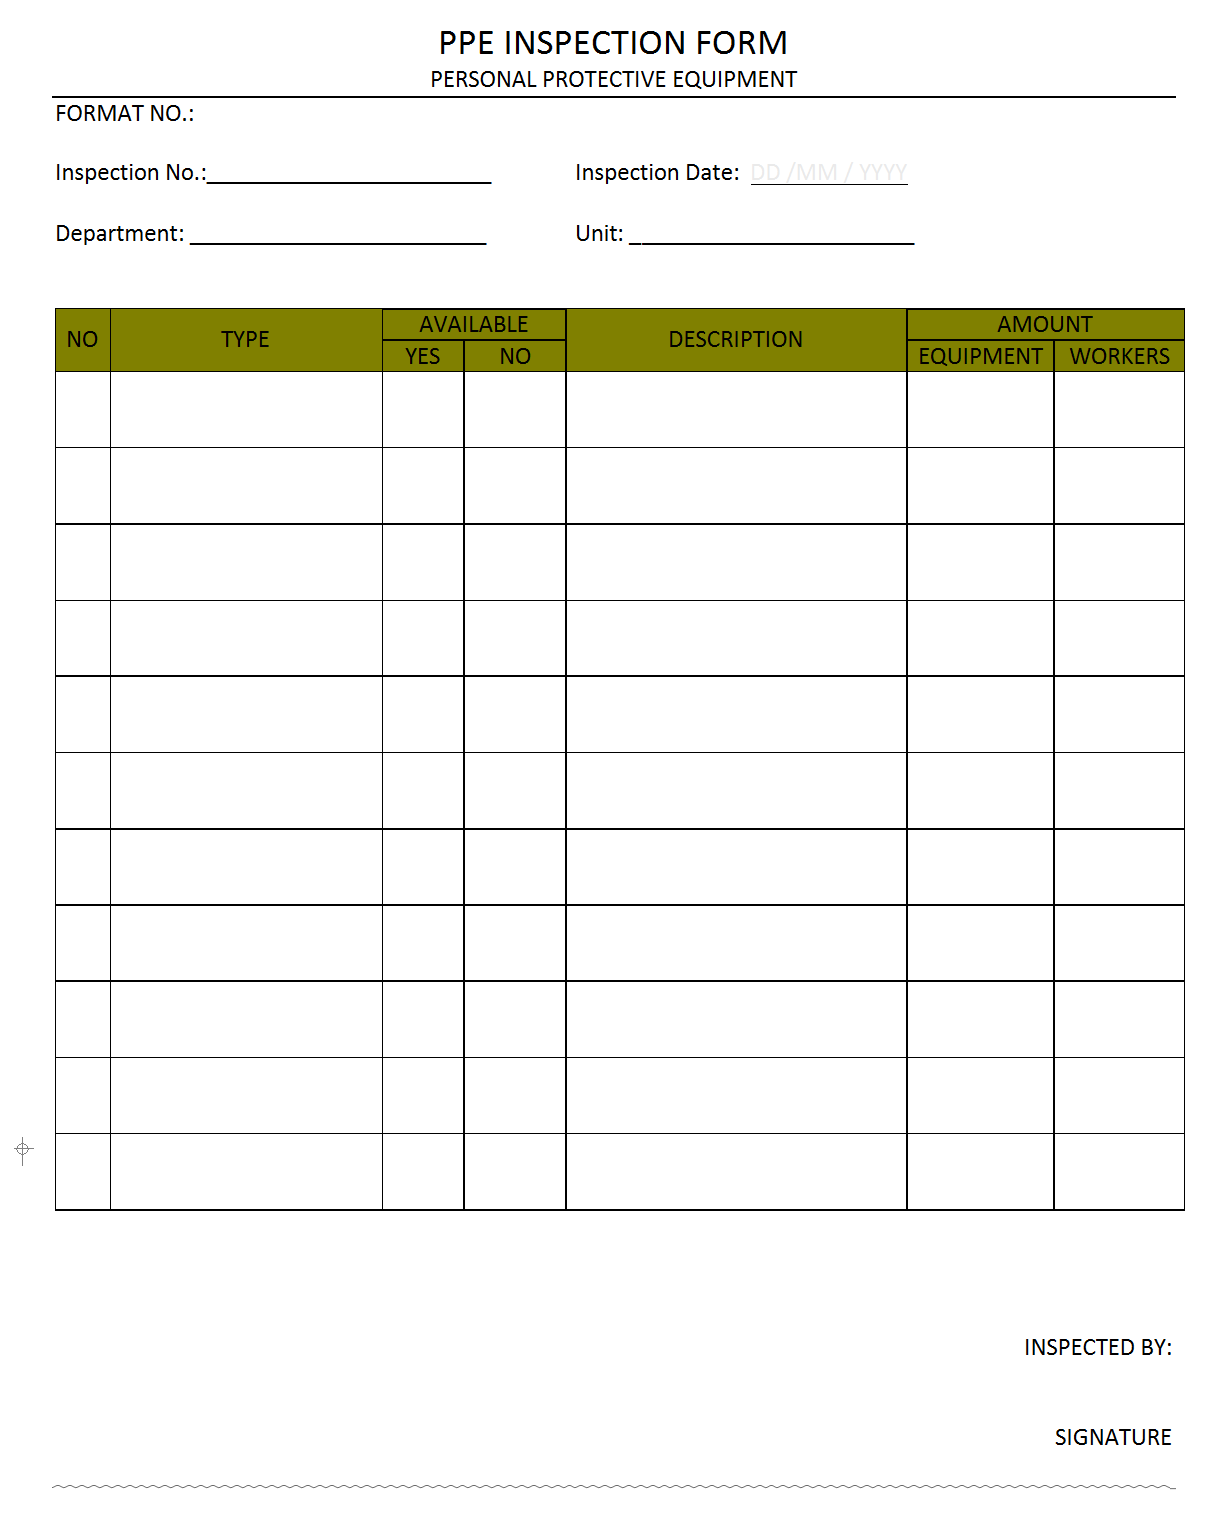 PPE Inspection form